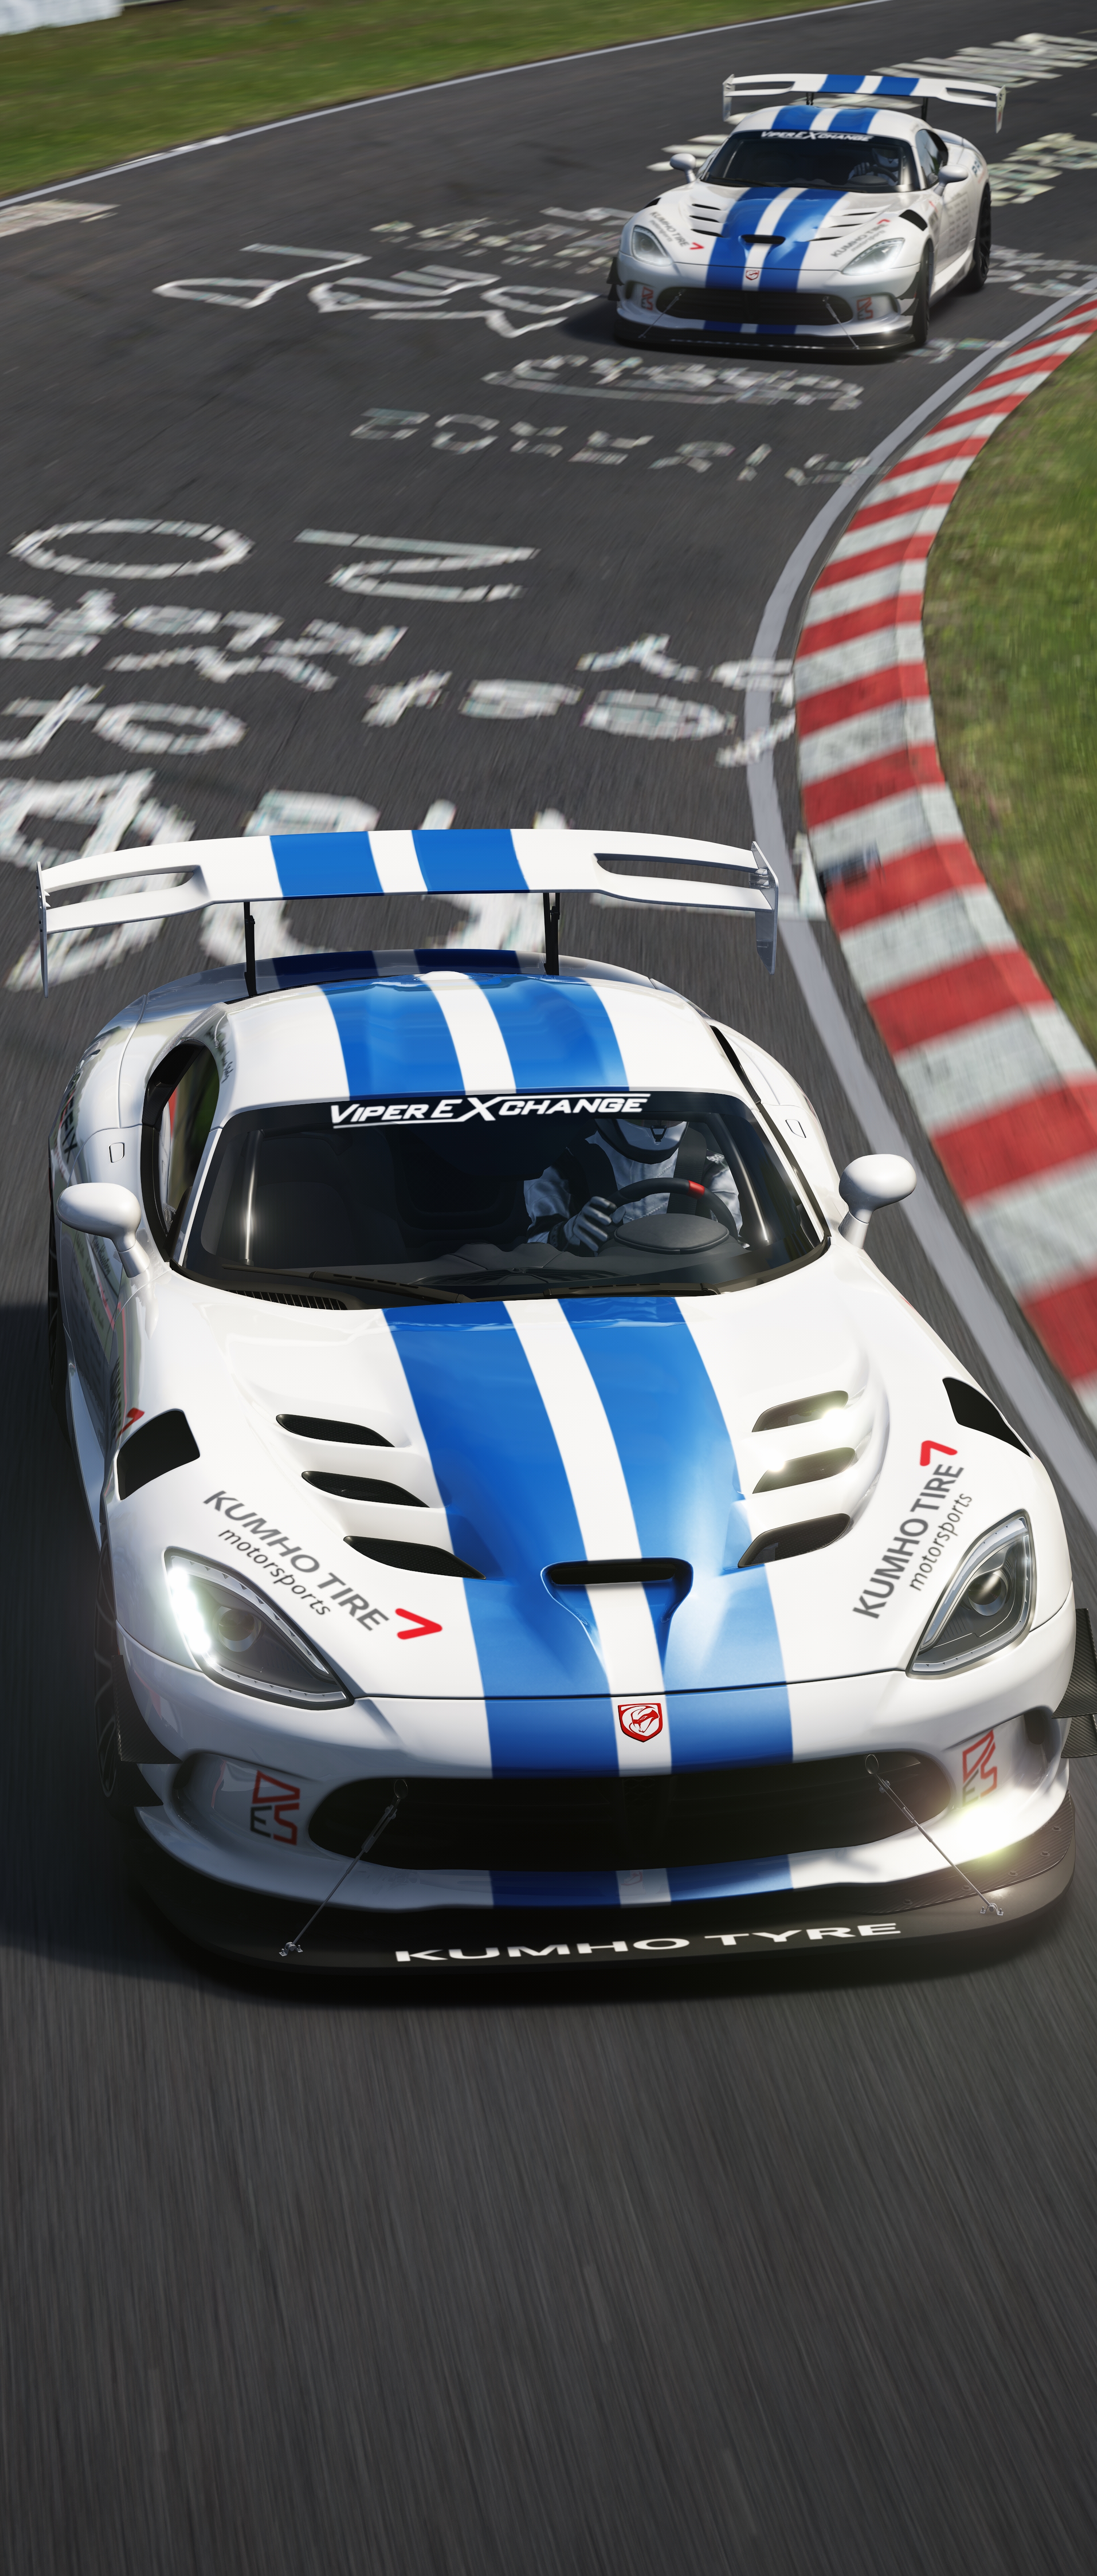 Dodge SRT Viper In Nurburgring Nordschleife Récord Wallpaper by Gt33